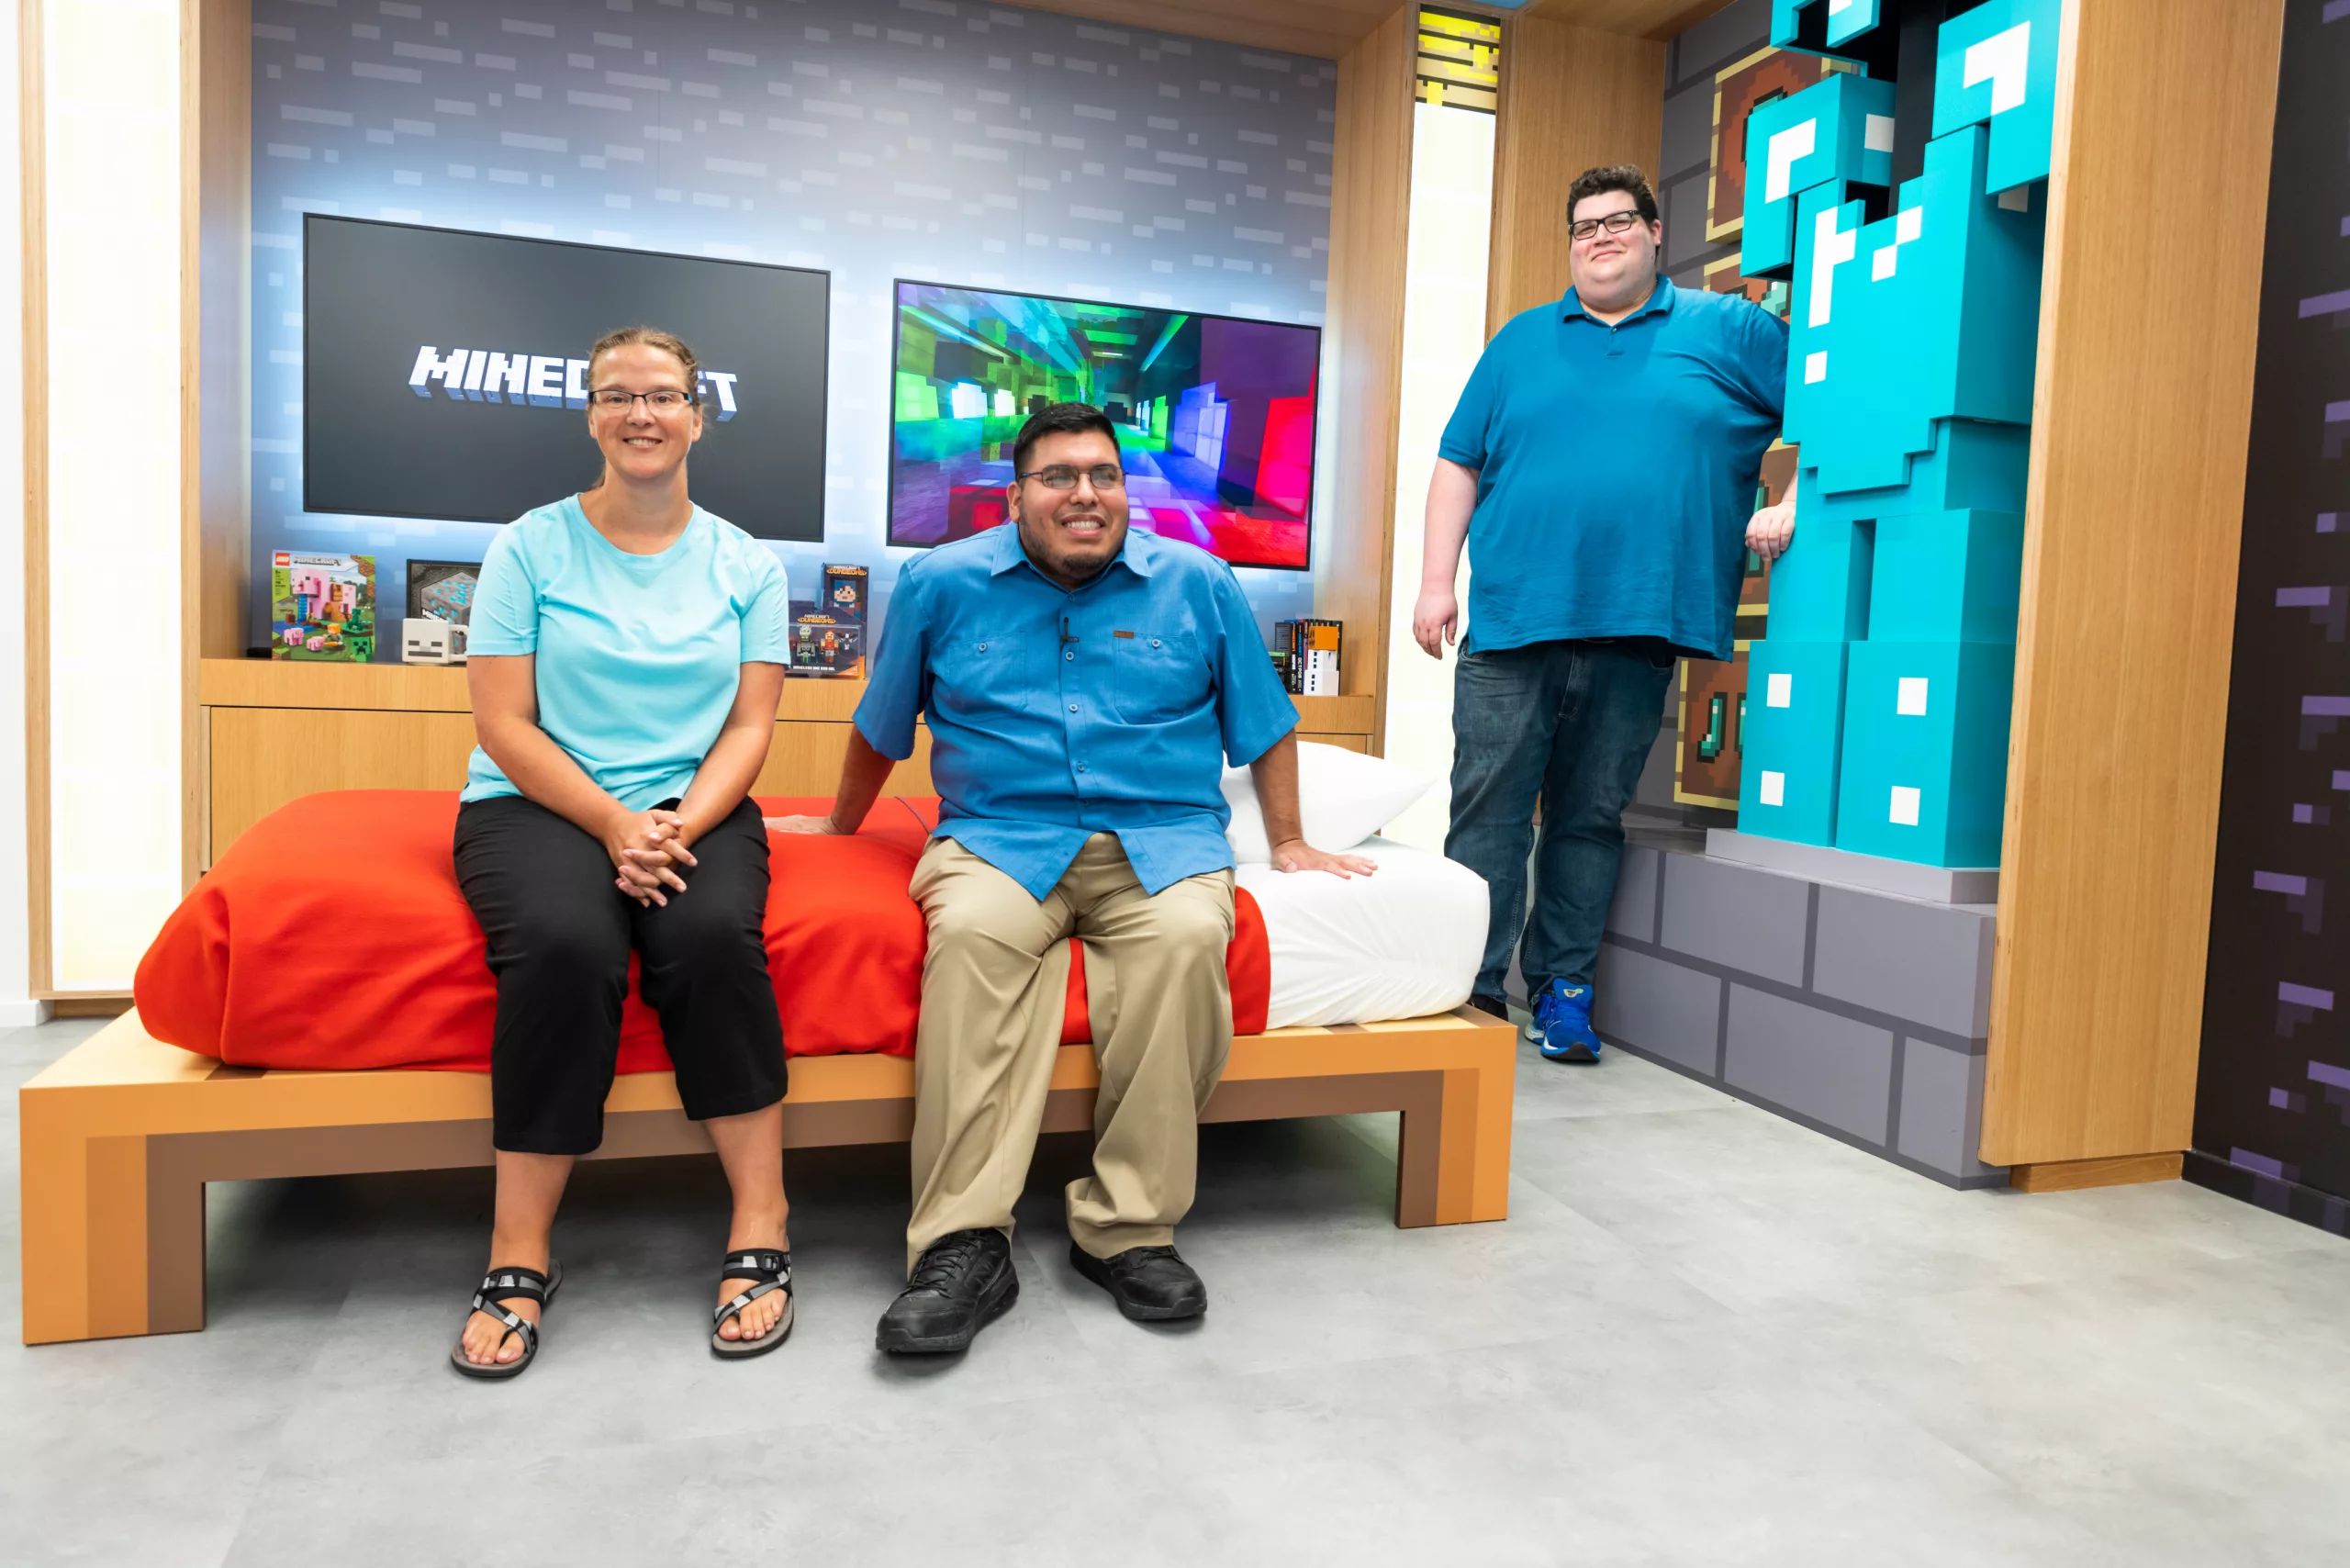 Foreground: a woman and a man sit smiling on a bed in an experiential Minecraft gaming environment while another man stands on the right next to them. Background: two screens behind the sitting people with one that says “Minecraft” and the walls are made to look like the Minecraft “building-block” aesthetic.